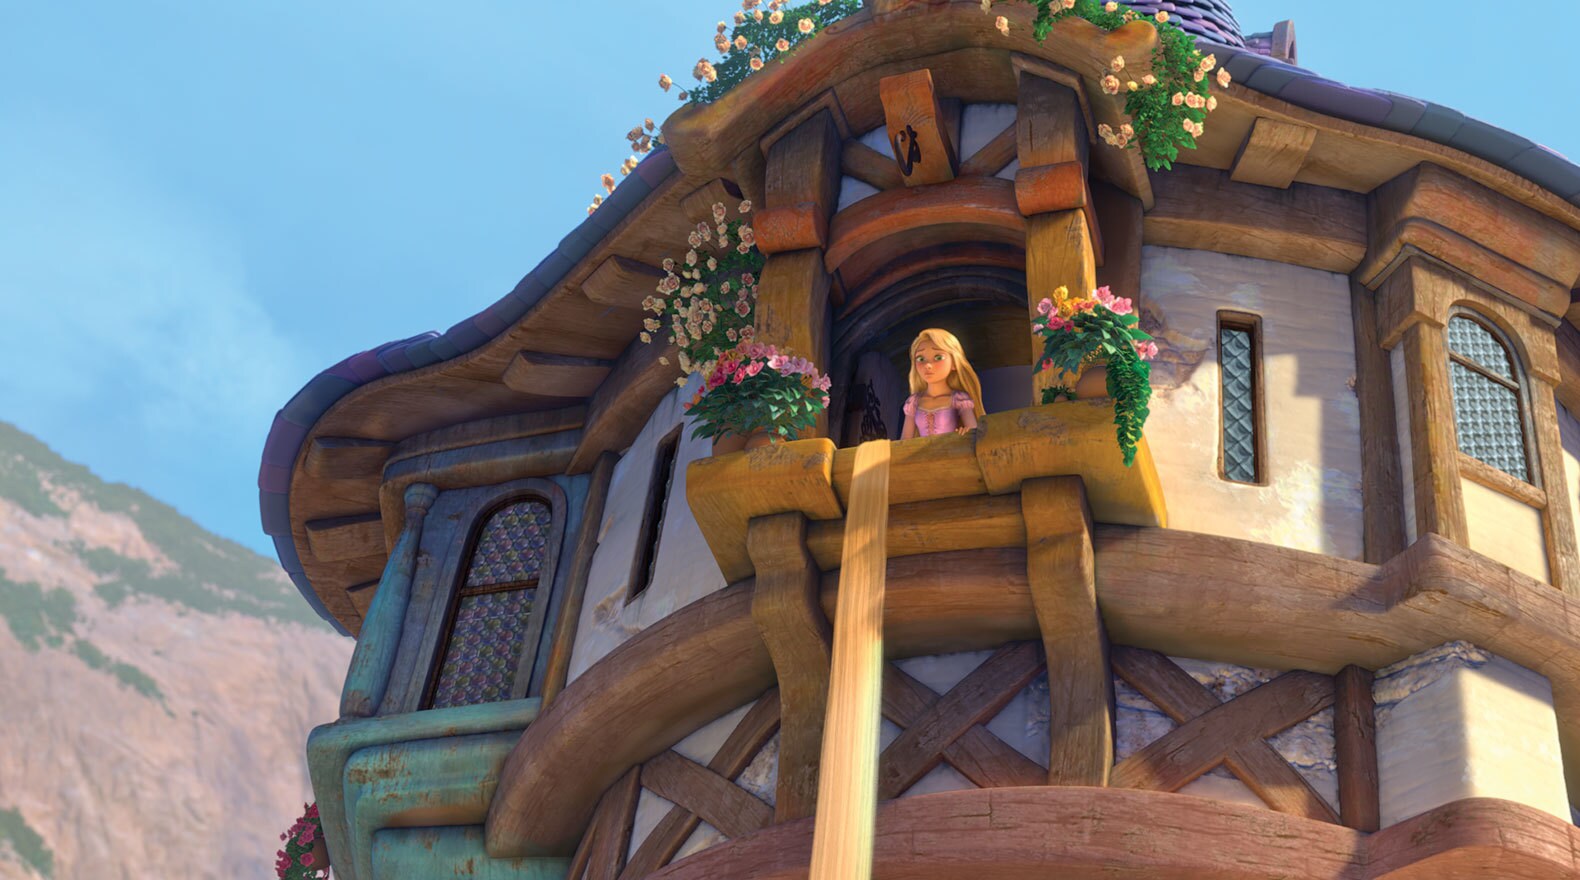 Rapunzel’s dream of leaving her tower is about to come true.